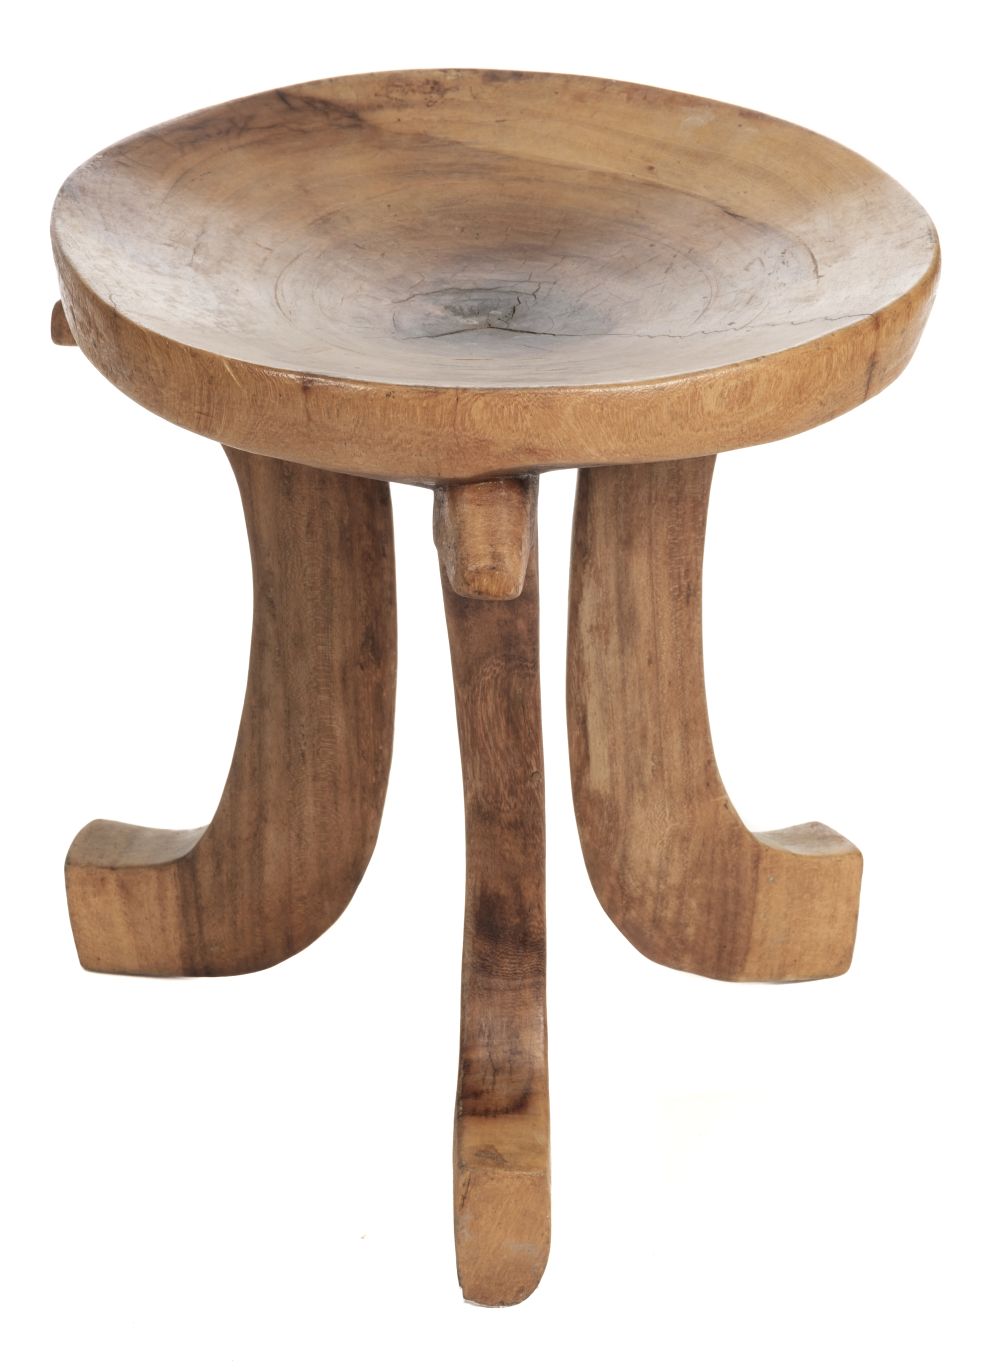 * Ethiopia. A Jimma carved wood stool